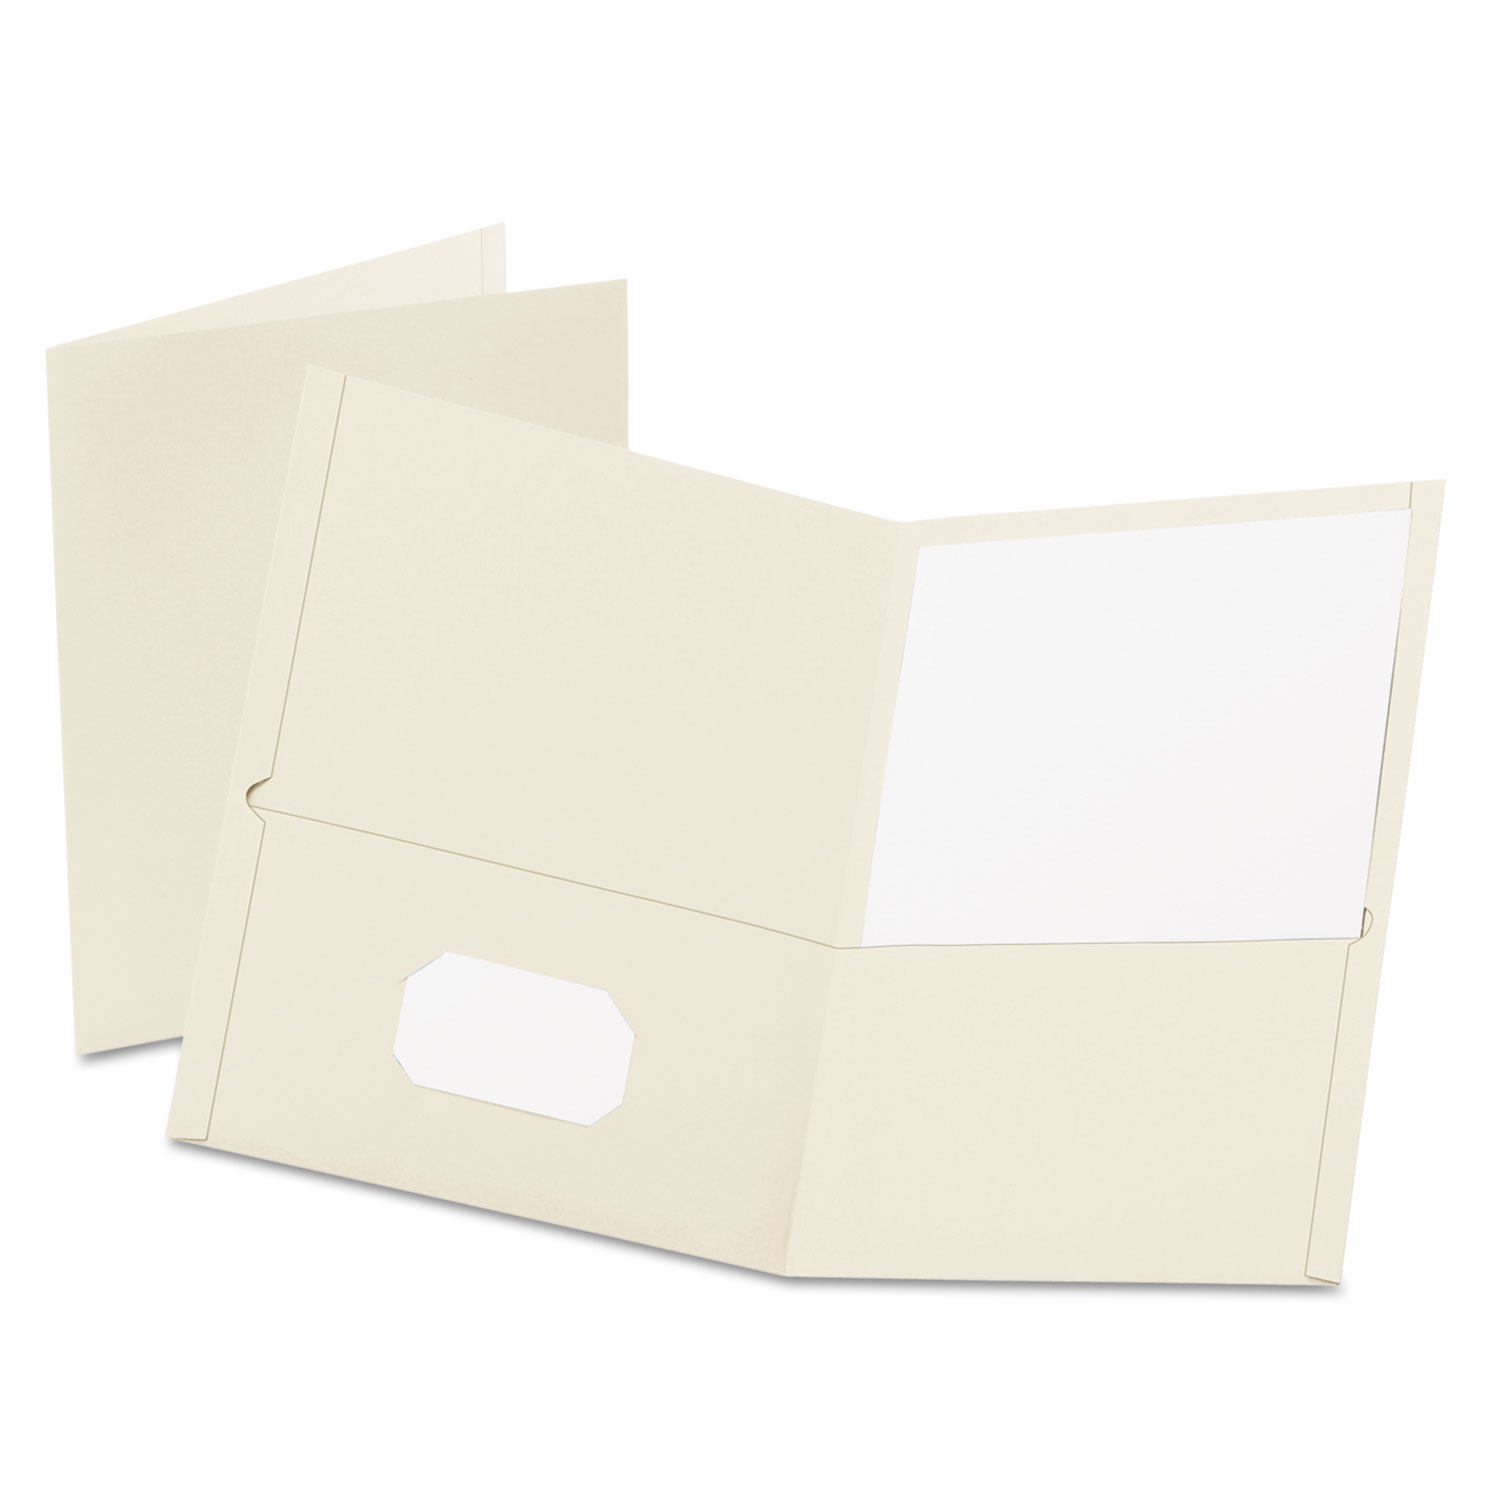  Oxford 57504EE Twin-Pocket Folder, Embossed Leather Grain Paper, White, 25/Box (OXF57504) 